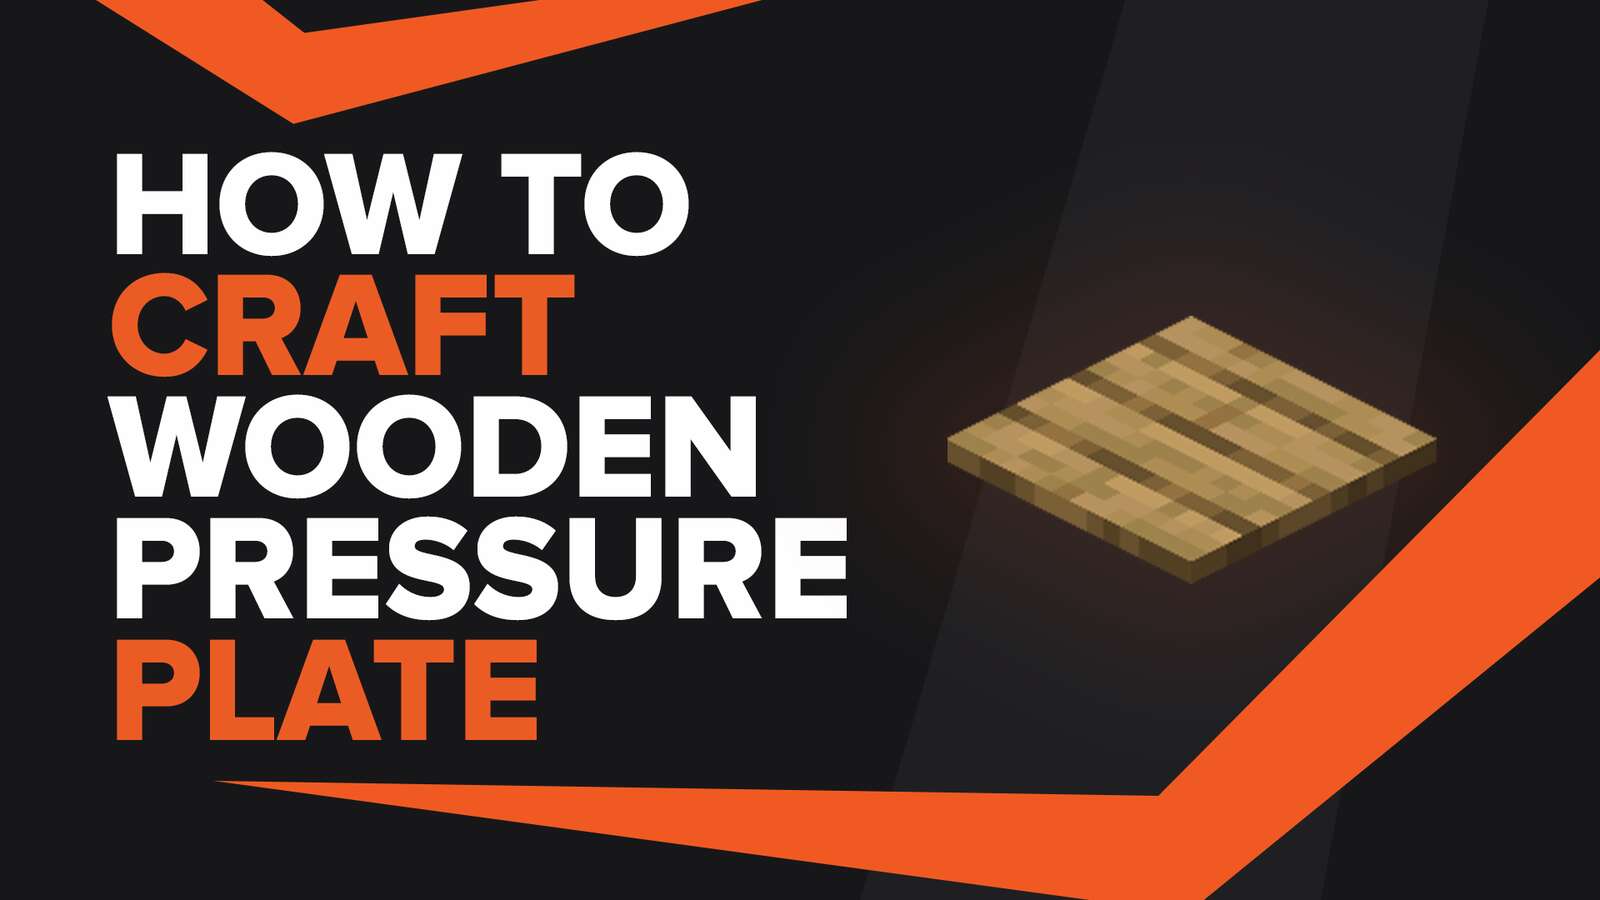 How To Make Wooden Pressure Plate In Minecraft